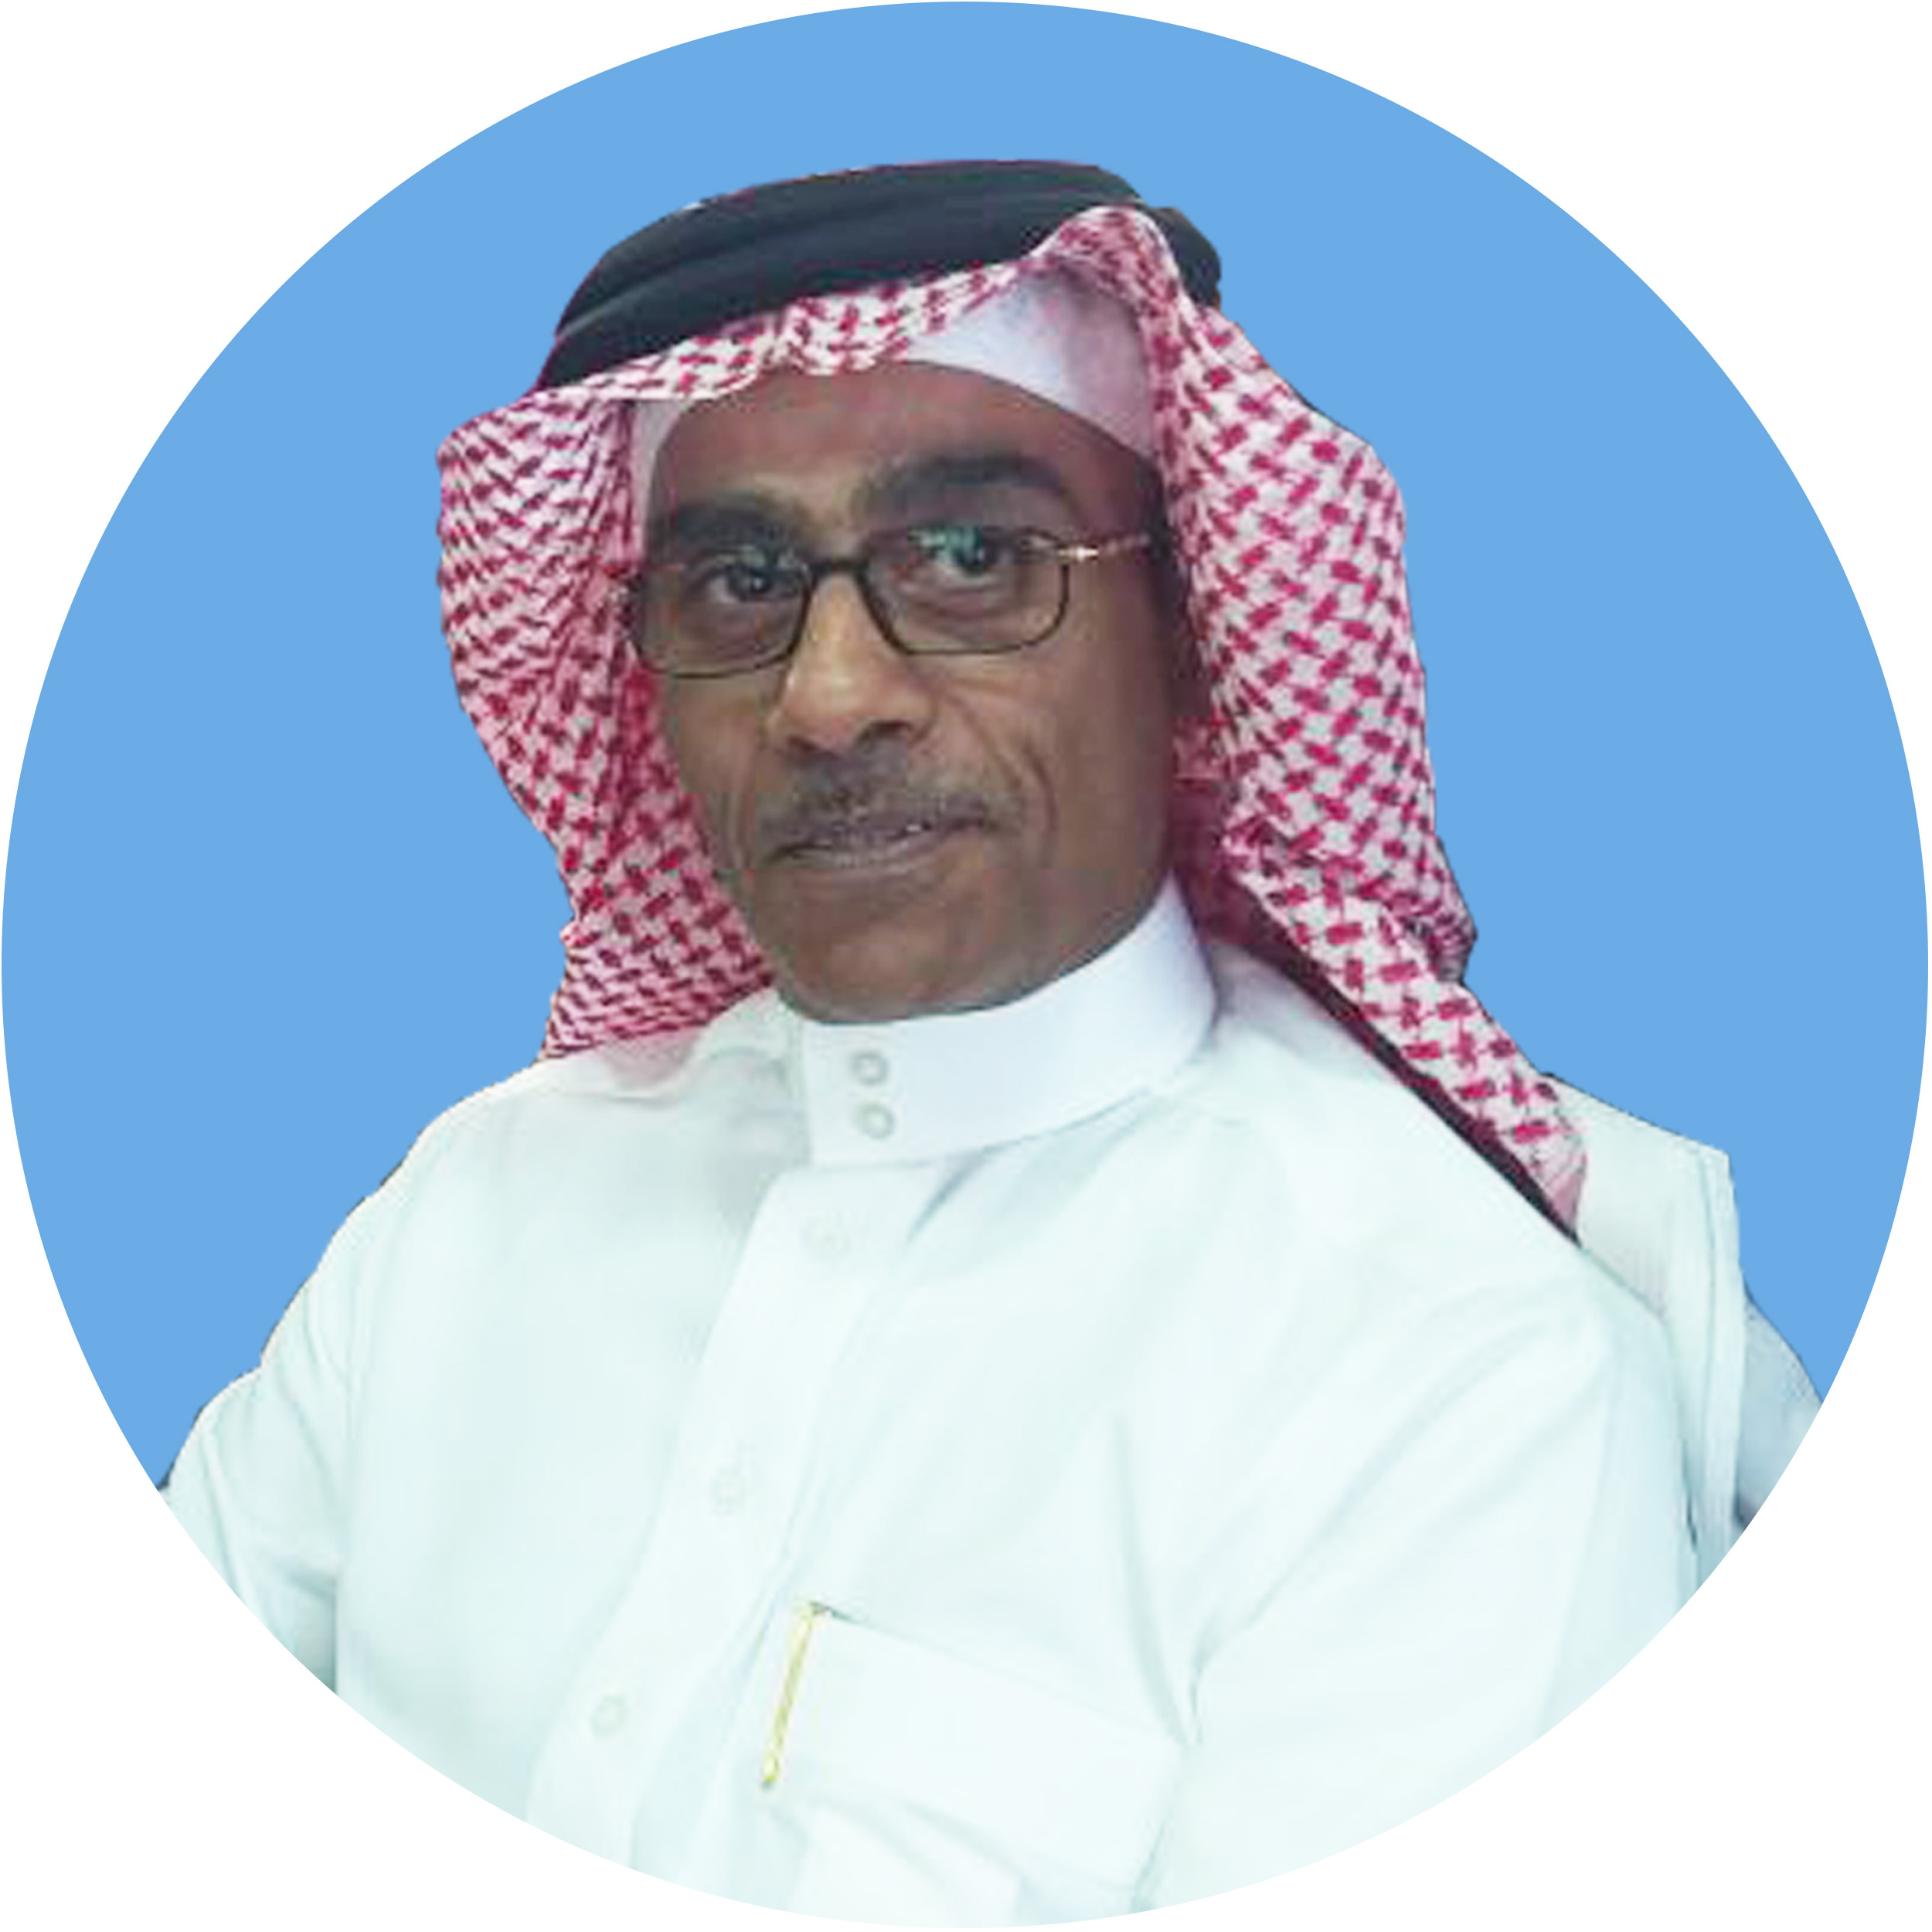 Mr. Majed A. Al-Betairy